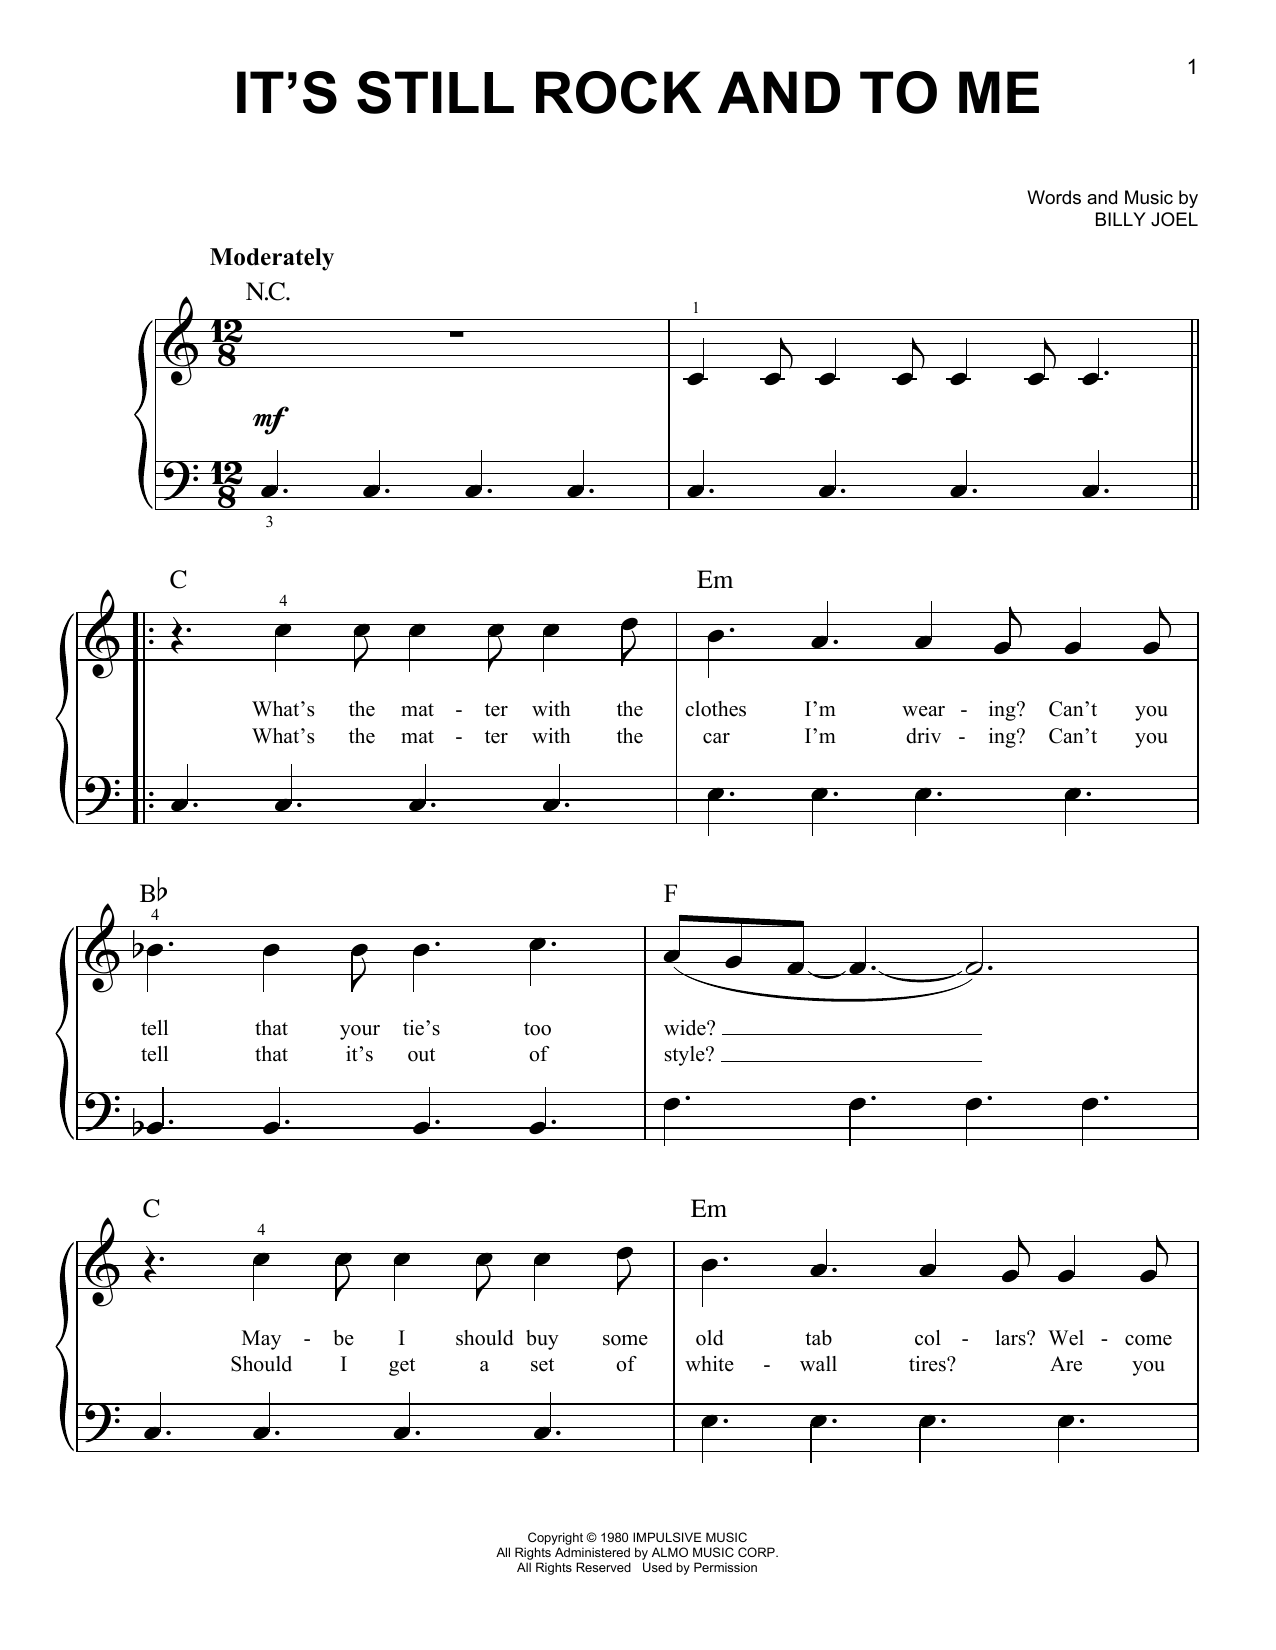 Download Billy Joel It's Still Rock And Roll To Me Sheet Music